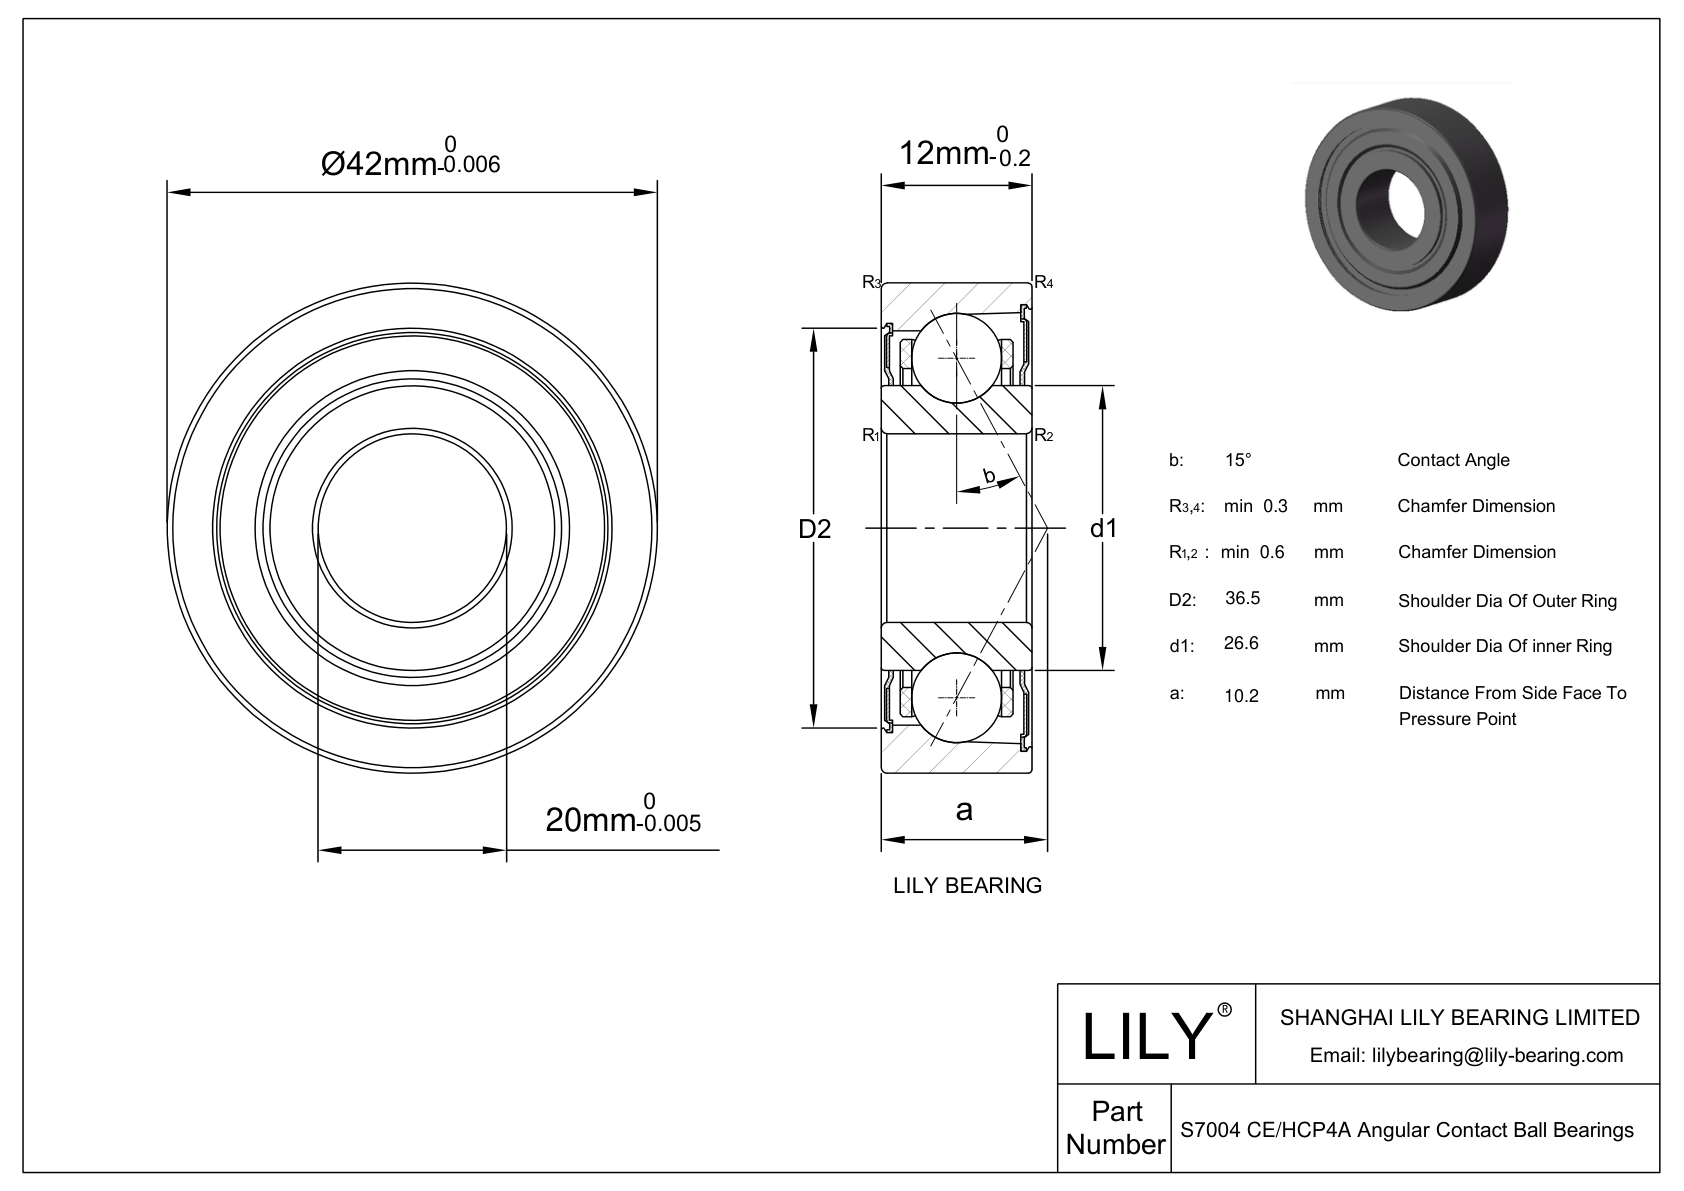 S7004 CE/HCP4A Super Precision Angular Contact Ball Bearings cad drawing